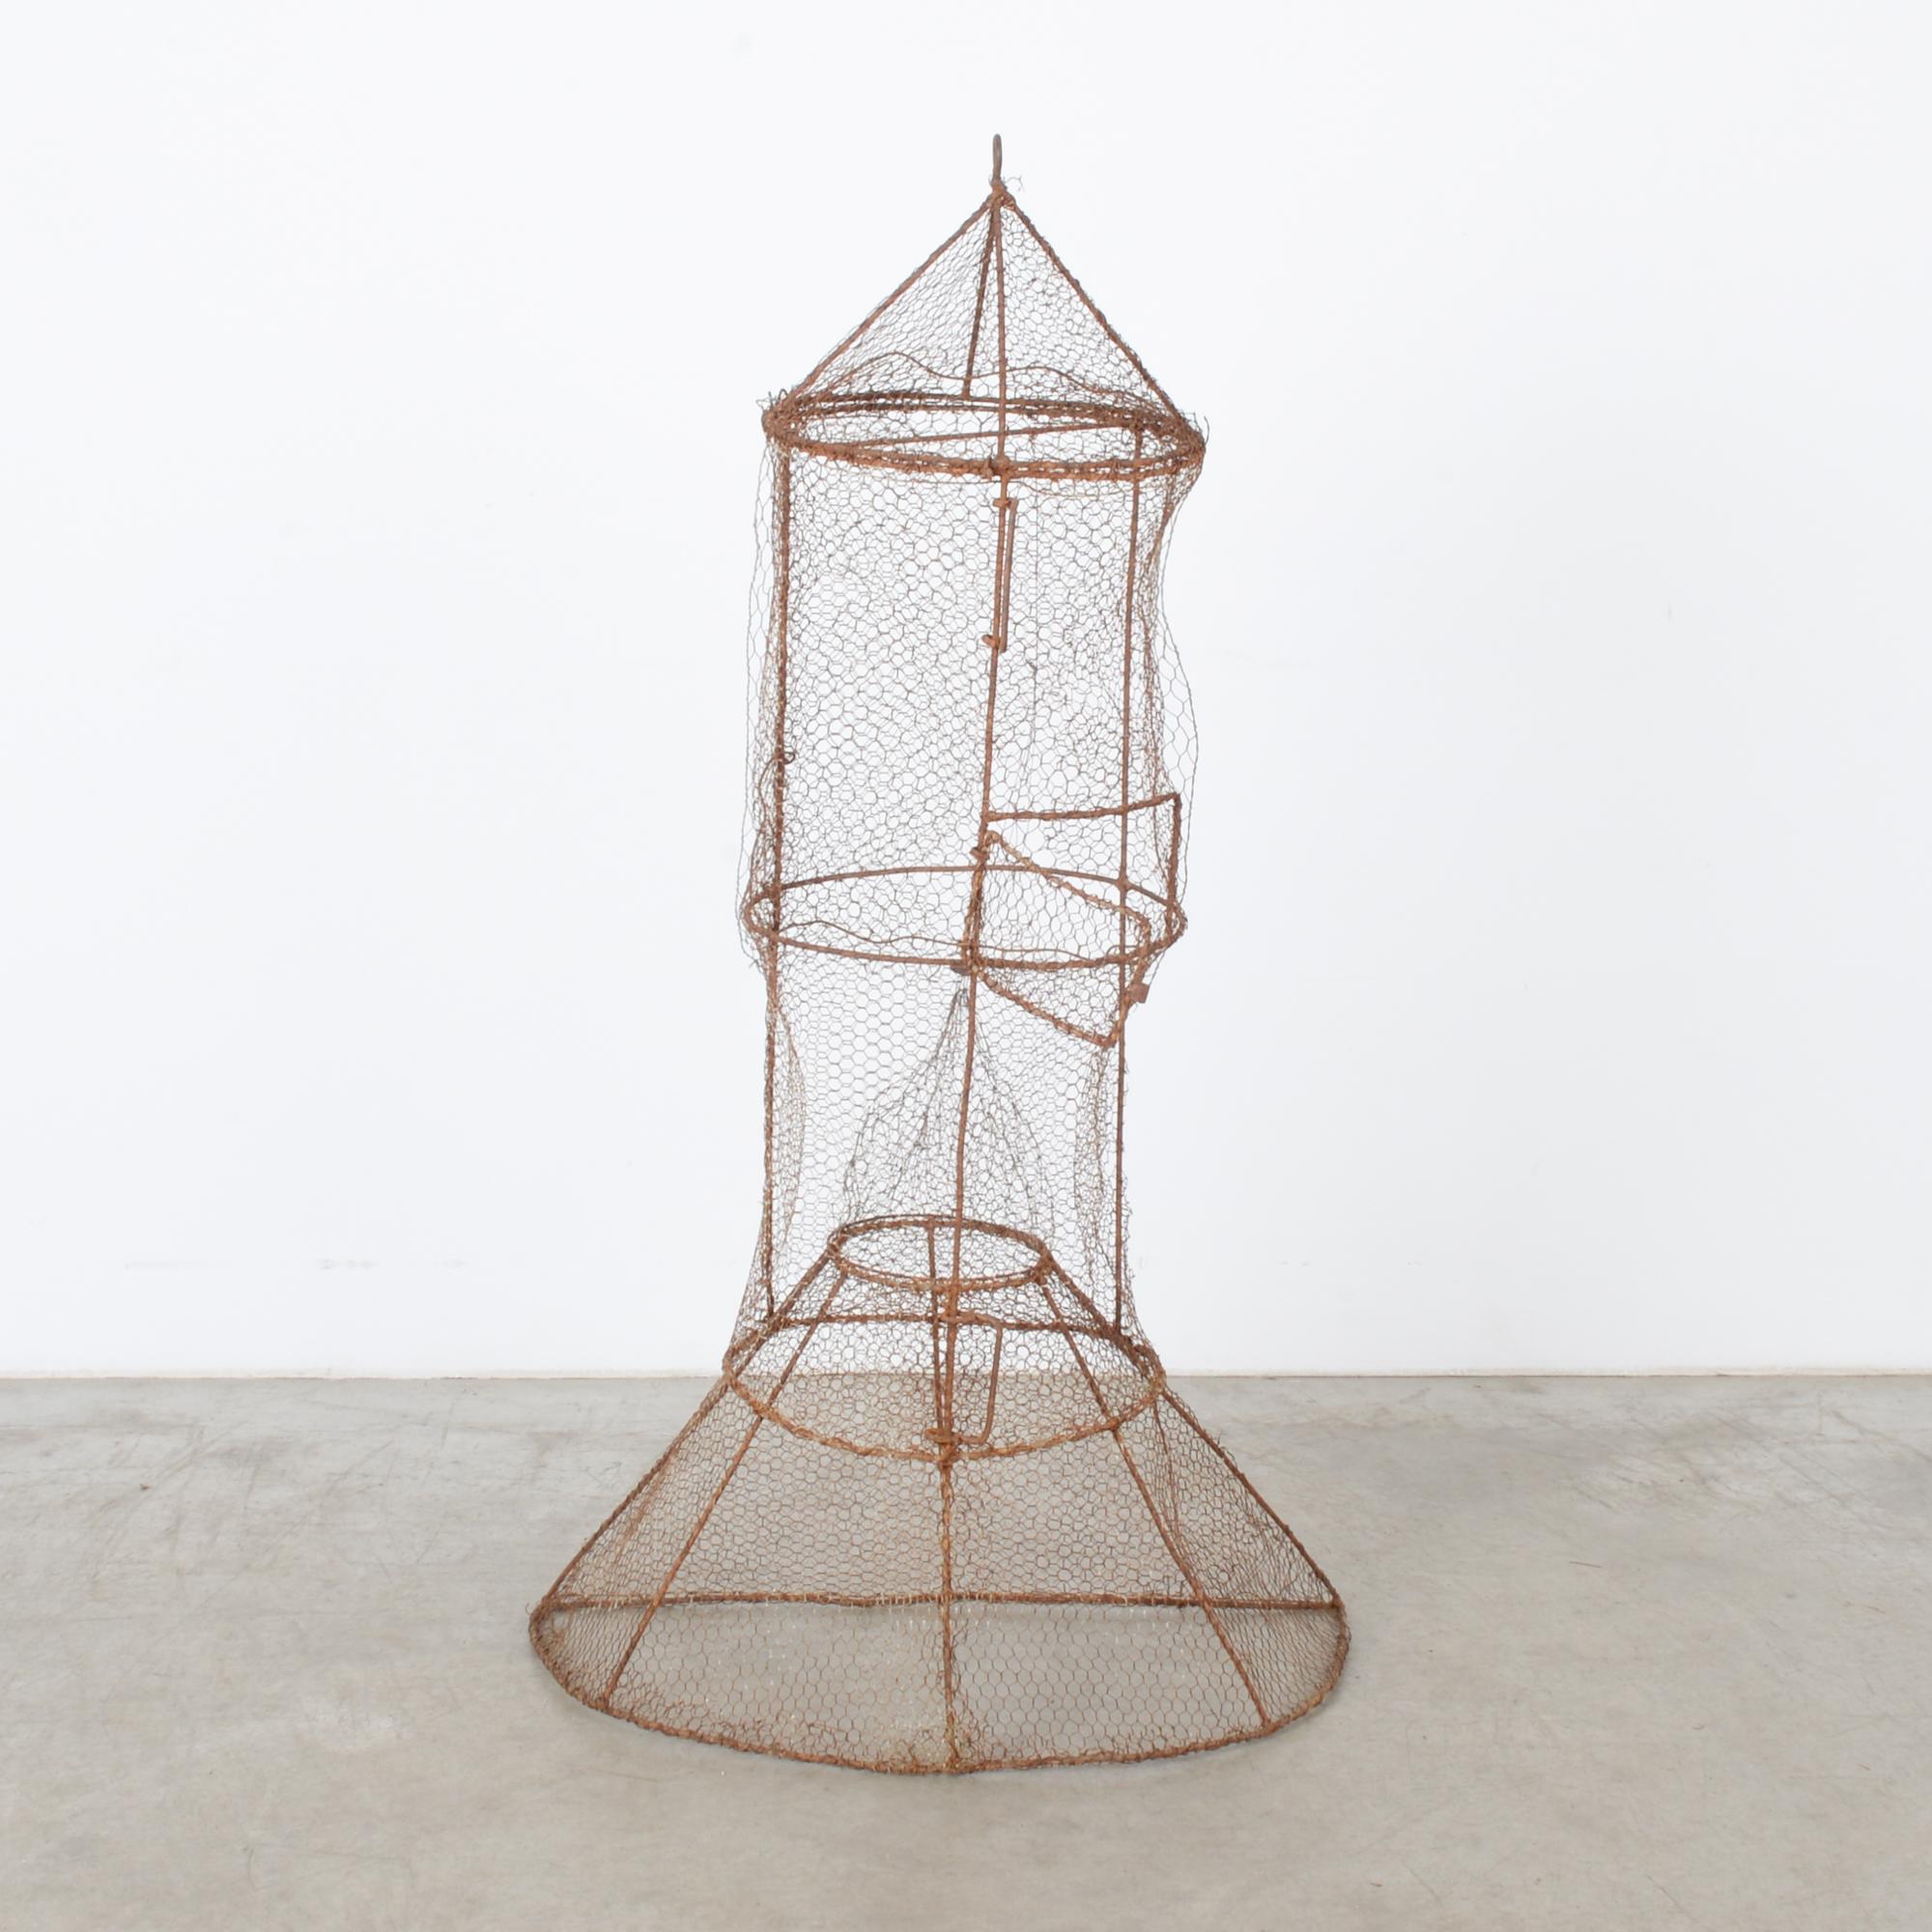 This fish trap was made in France, circa 1970, and will be a charming decorative piece with its beautiful rusted patina. Constructed with metal rods and wire mesh, the trap features a funnel and a cone on each end. The trap door is located in the